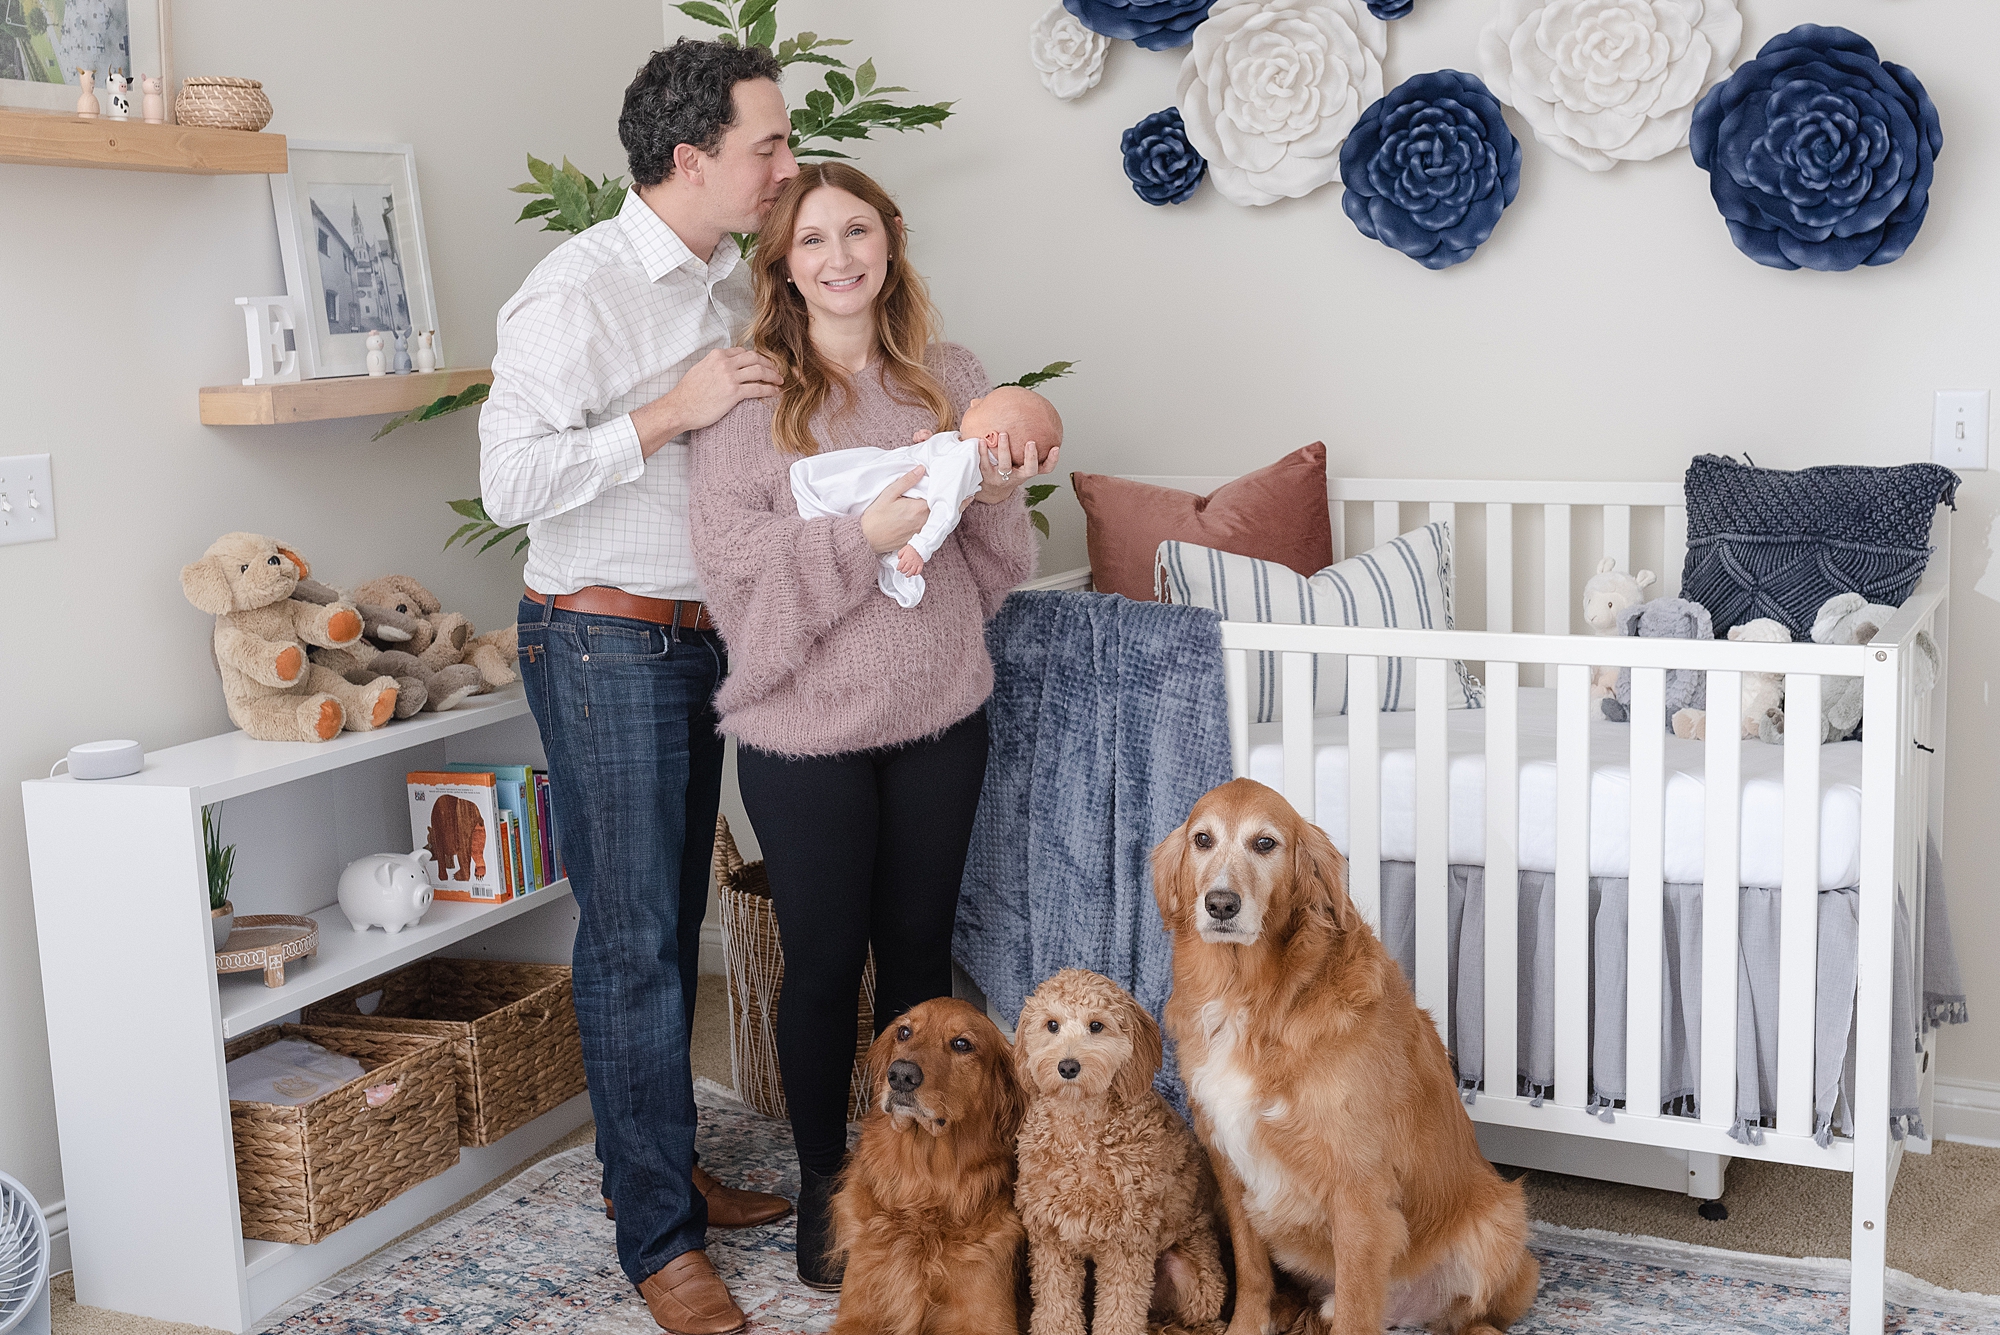 newborn family photography session in Nashville Tennessee featuring three family dogs who are wanting to be in the family photo in the newborn nursery